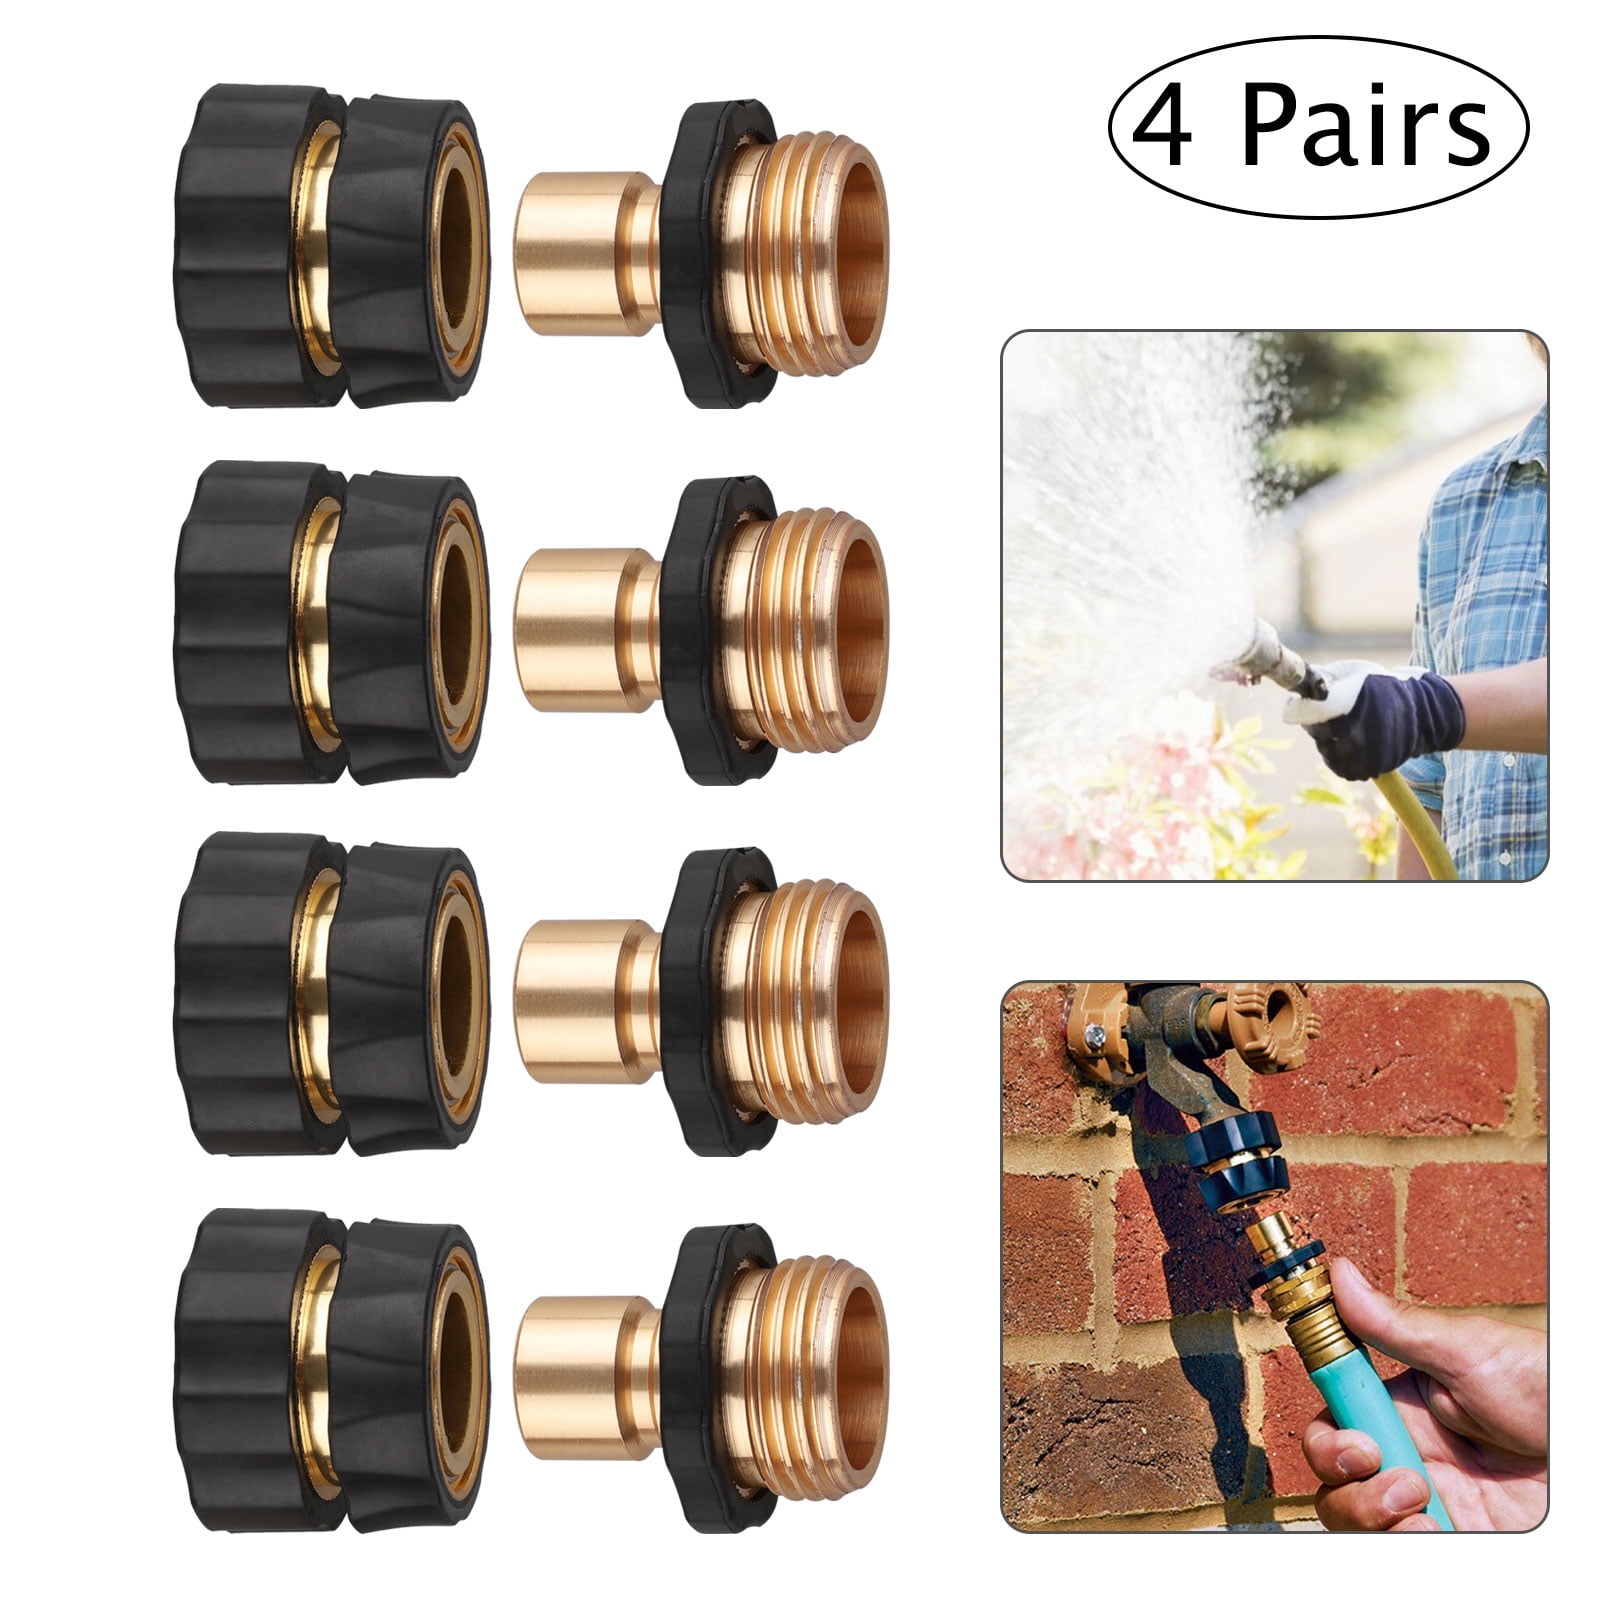 1-4 Set Garden Water Hose Quick Connector Brass Tap Adapter Male and Female 3/4" 